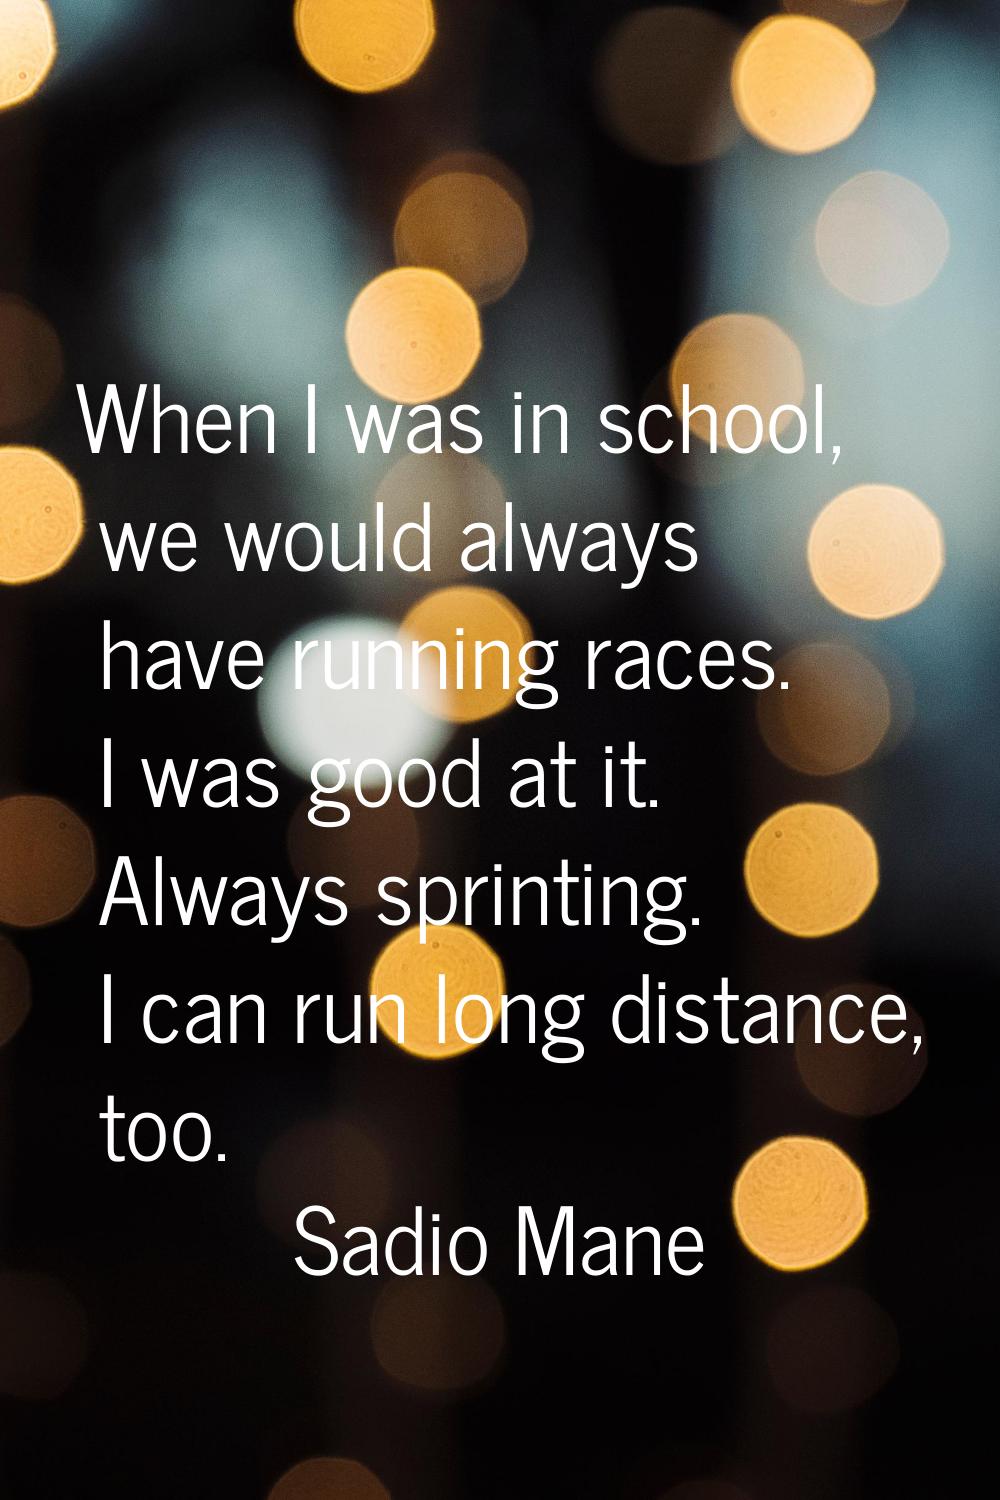 When I was in school, we would always have running races. I was good at it. Always sprinting. I can